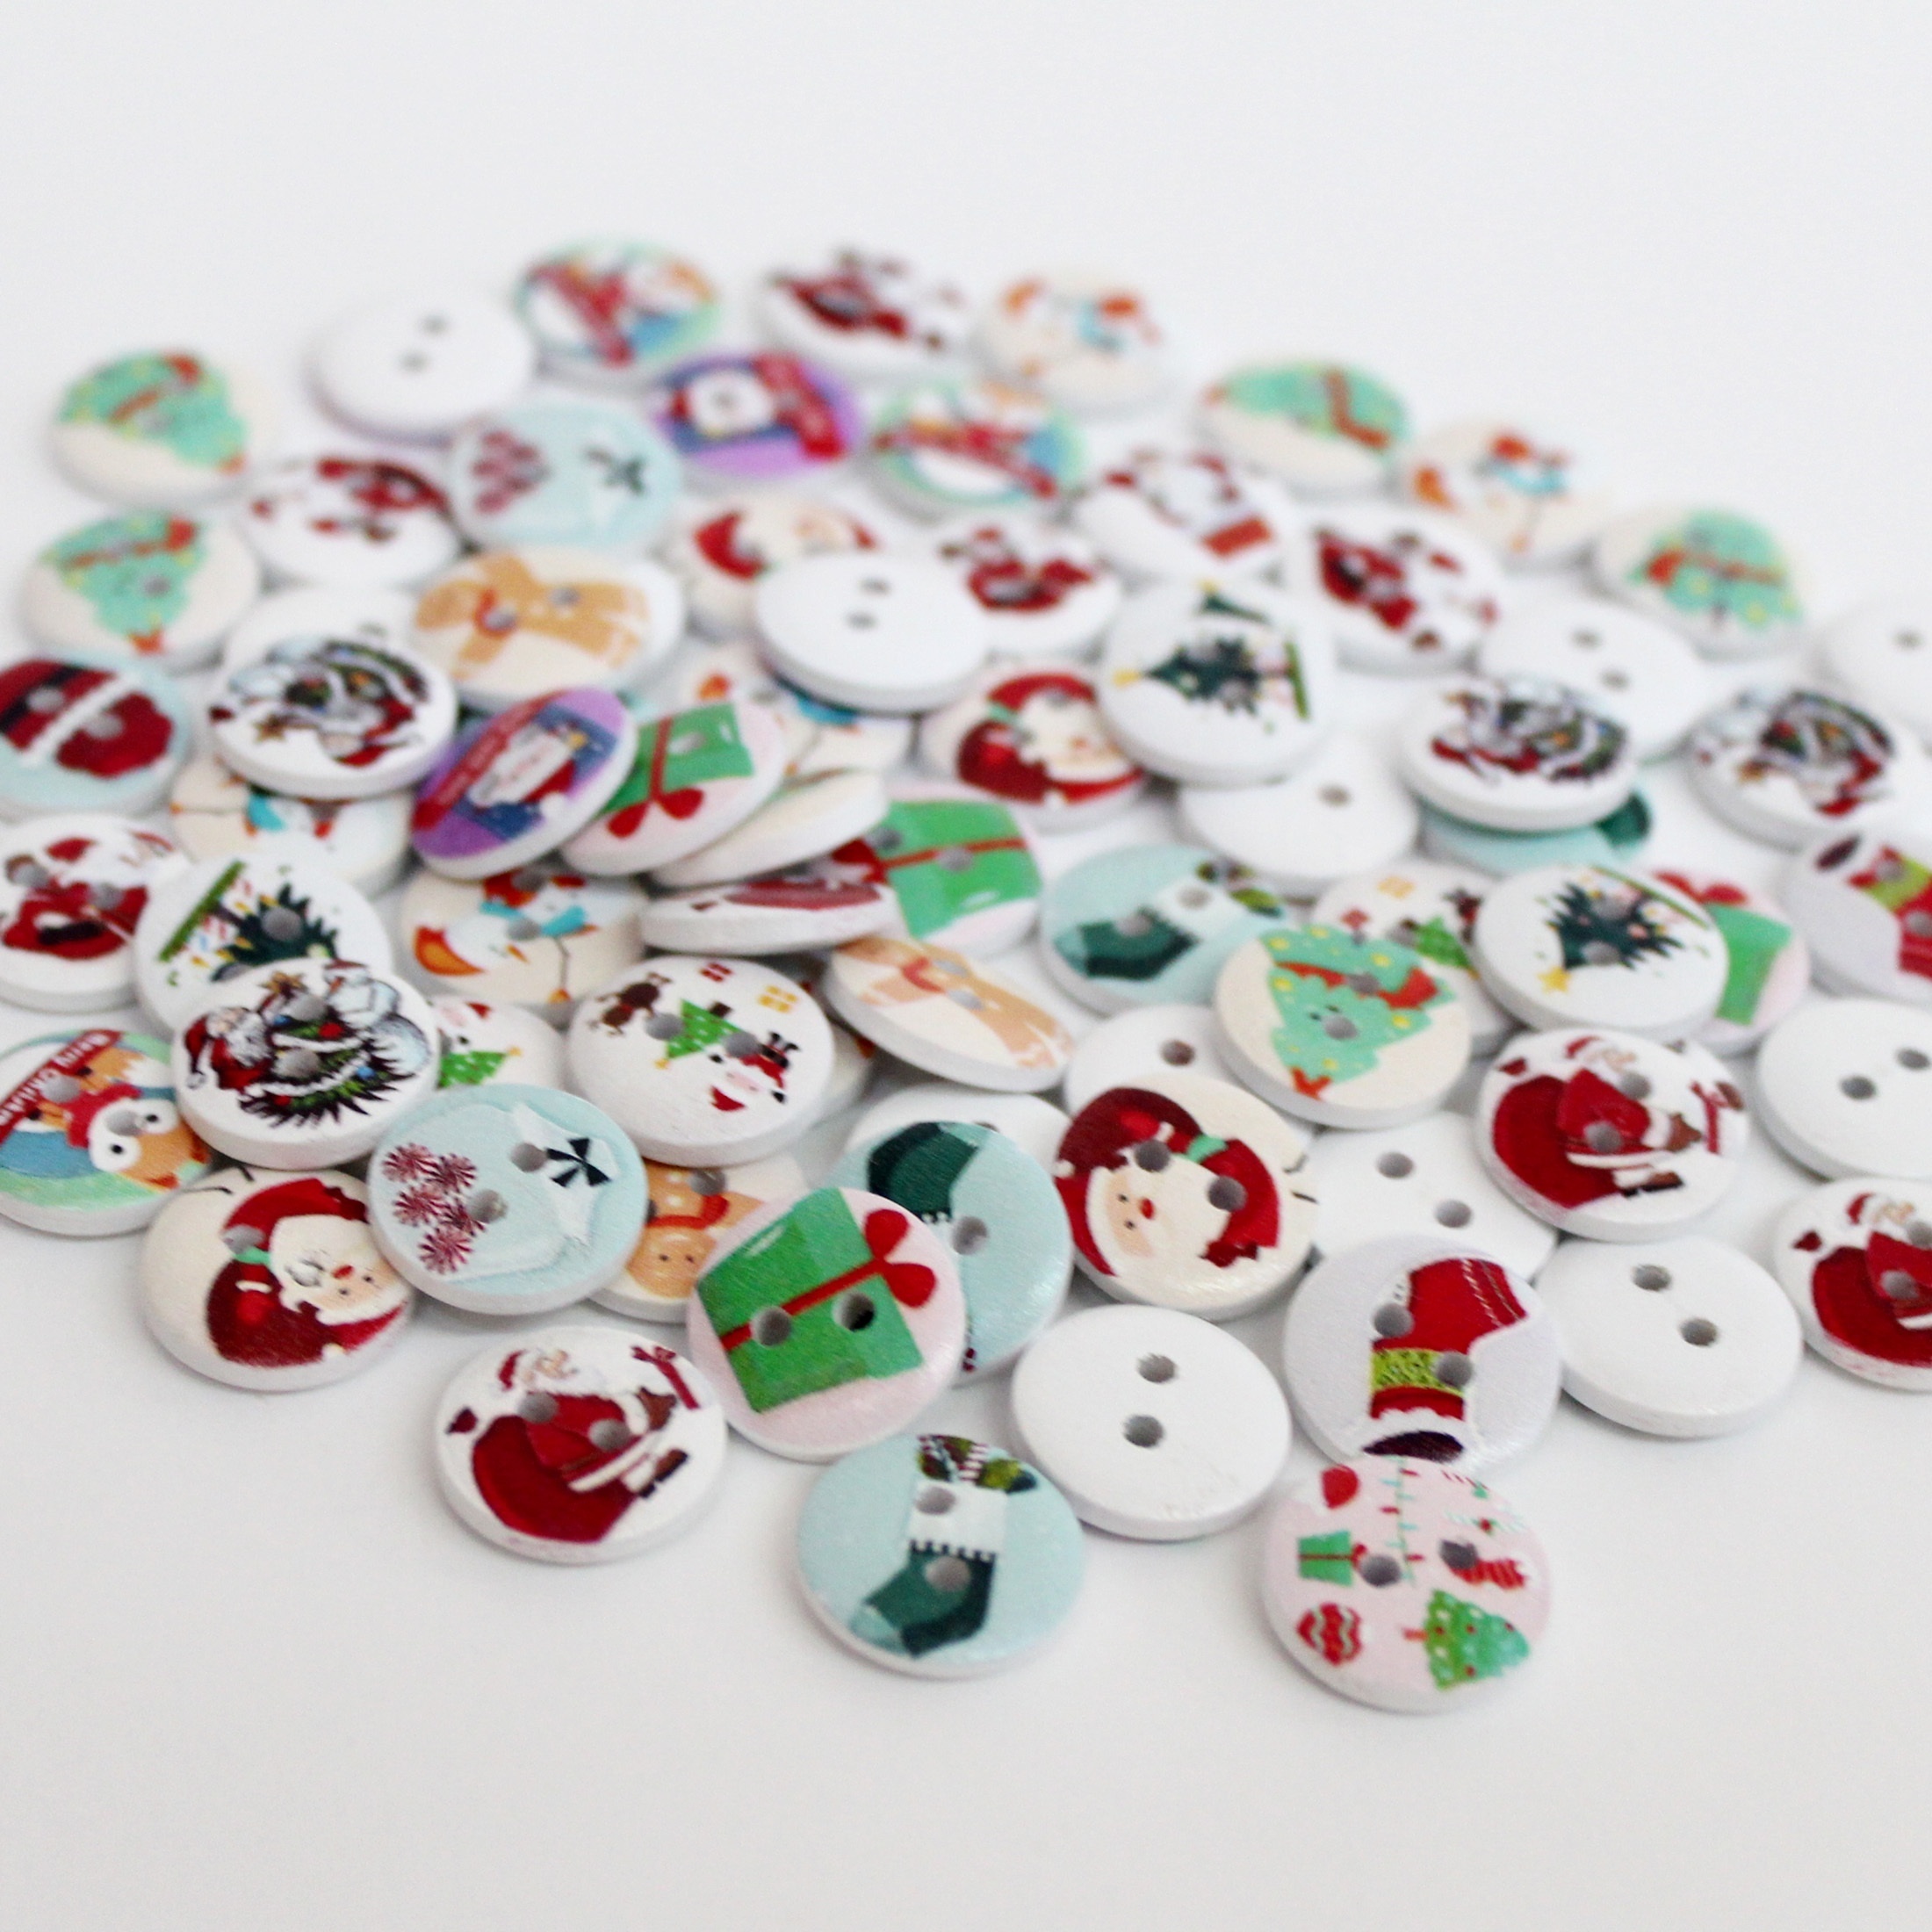 Mr. and Mrs. Claus - Shelly's Buttons - Christmas Buttons - Craft Scrap Sew